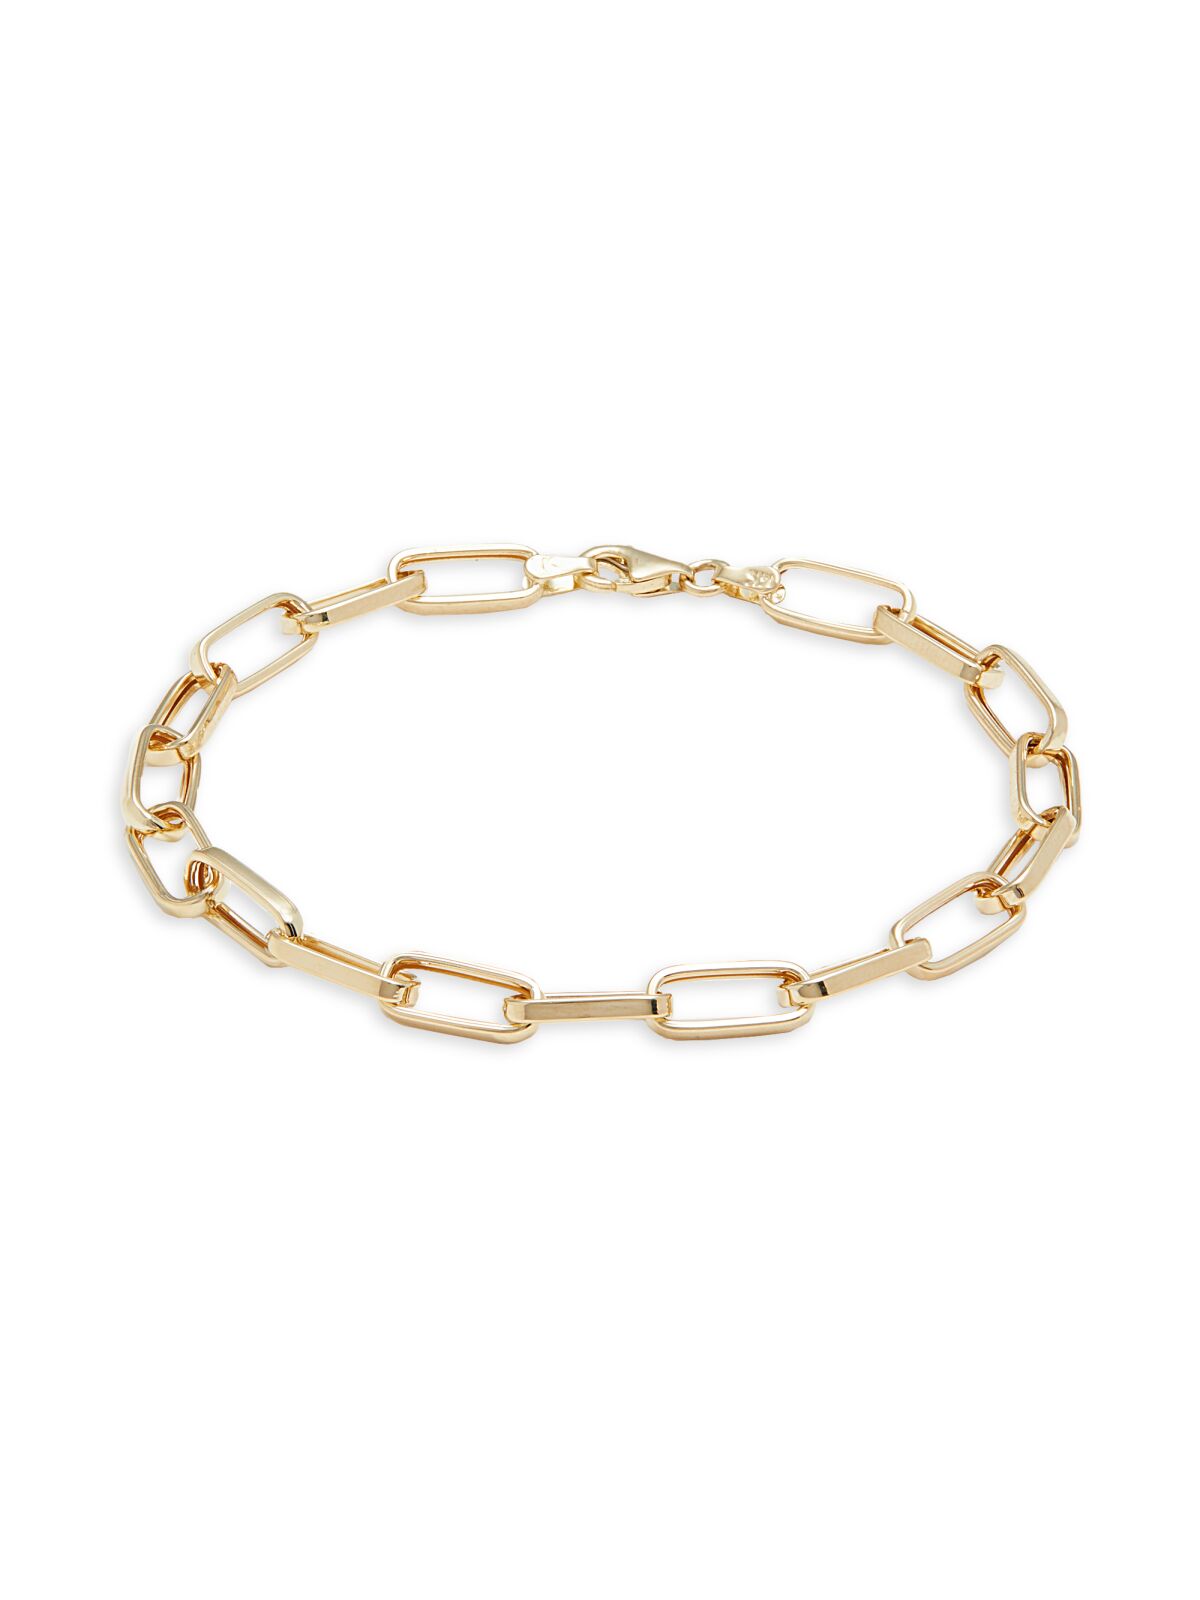 A photo of Sphera Milano paperclip bracelet from Saks Off 5th.